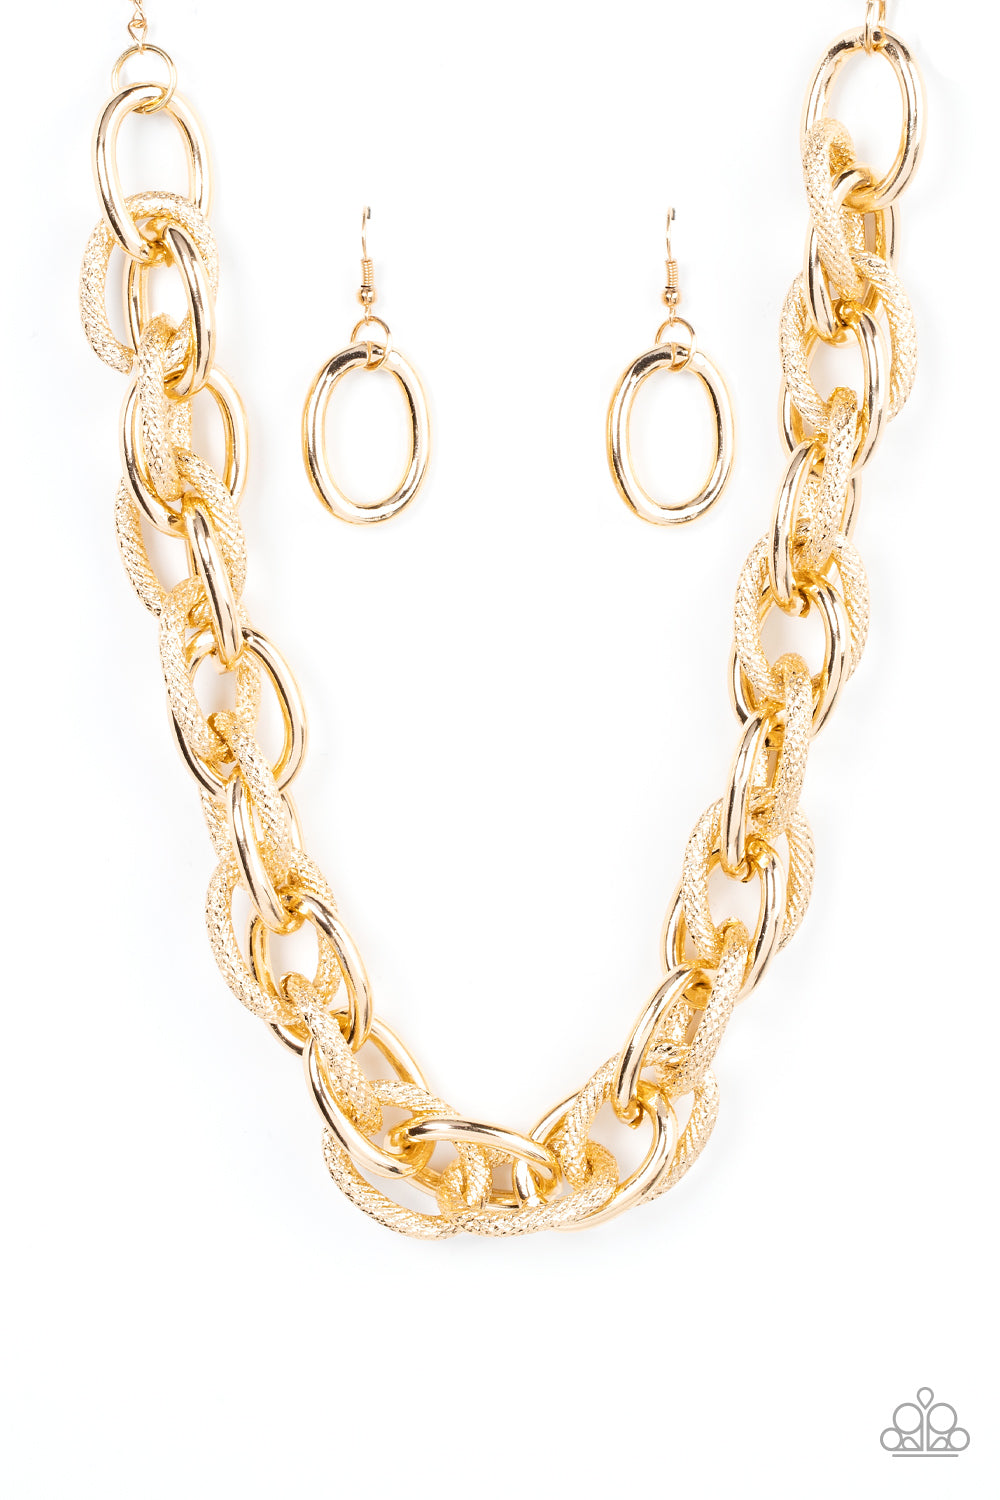 License to CHILL - gold - Paparazzi necklace